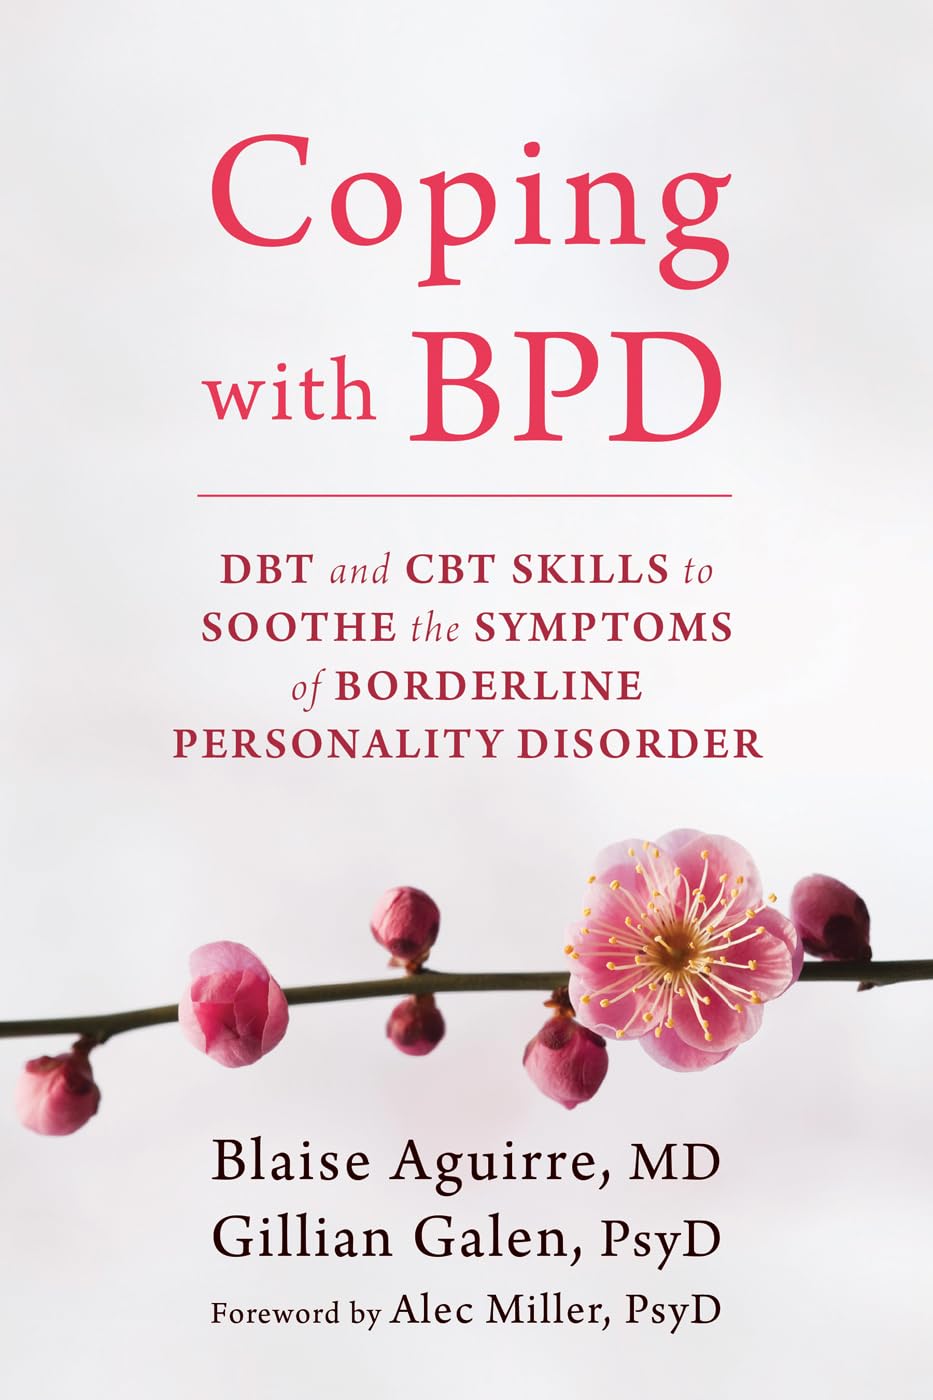 books about bpd: coping with bpd, dbt & cbt skills to soothe symptoms of bpd